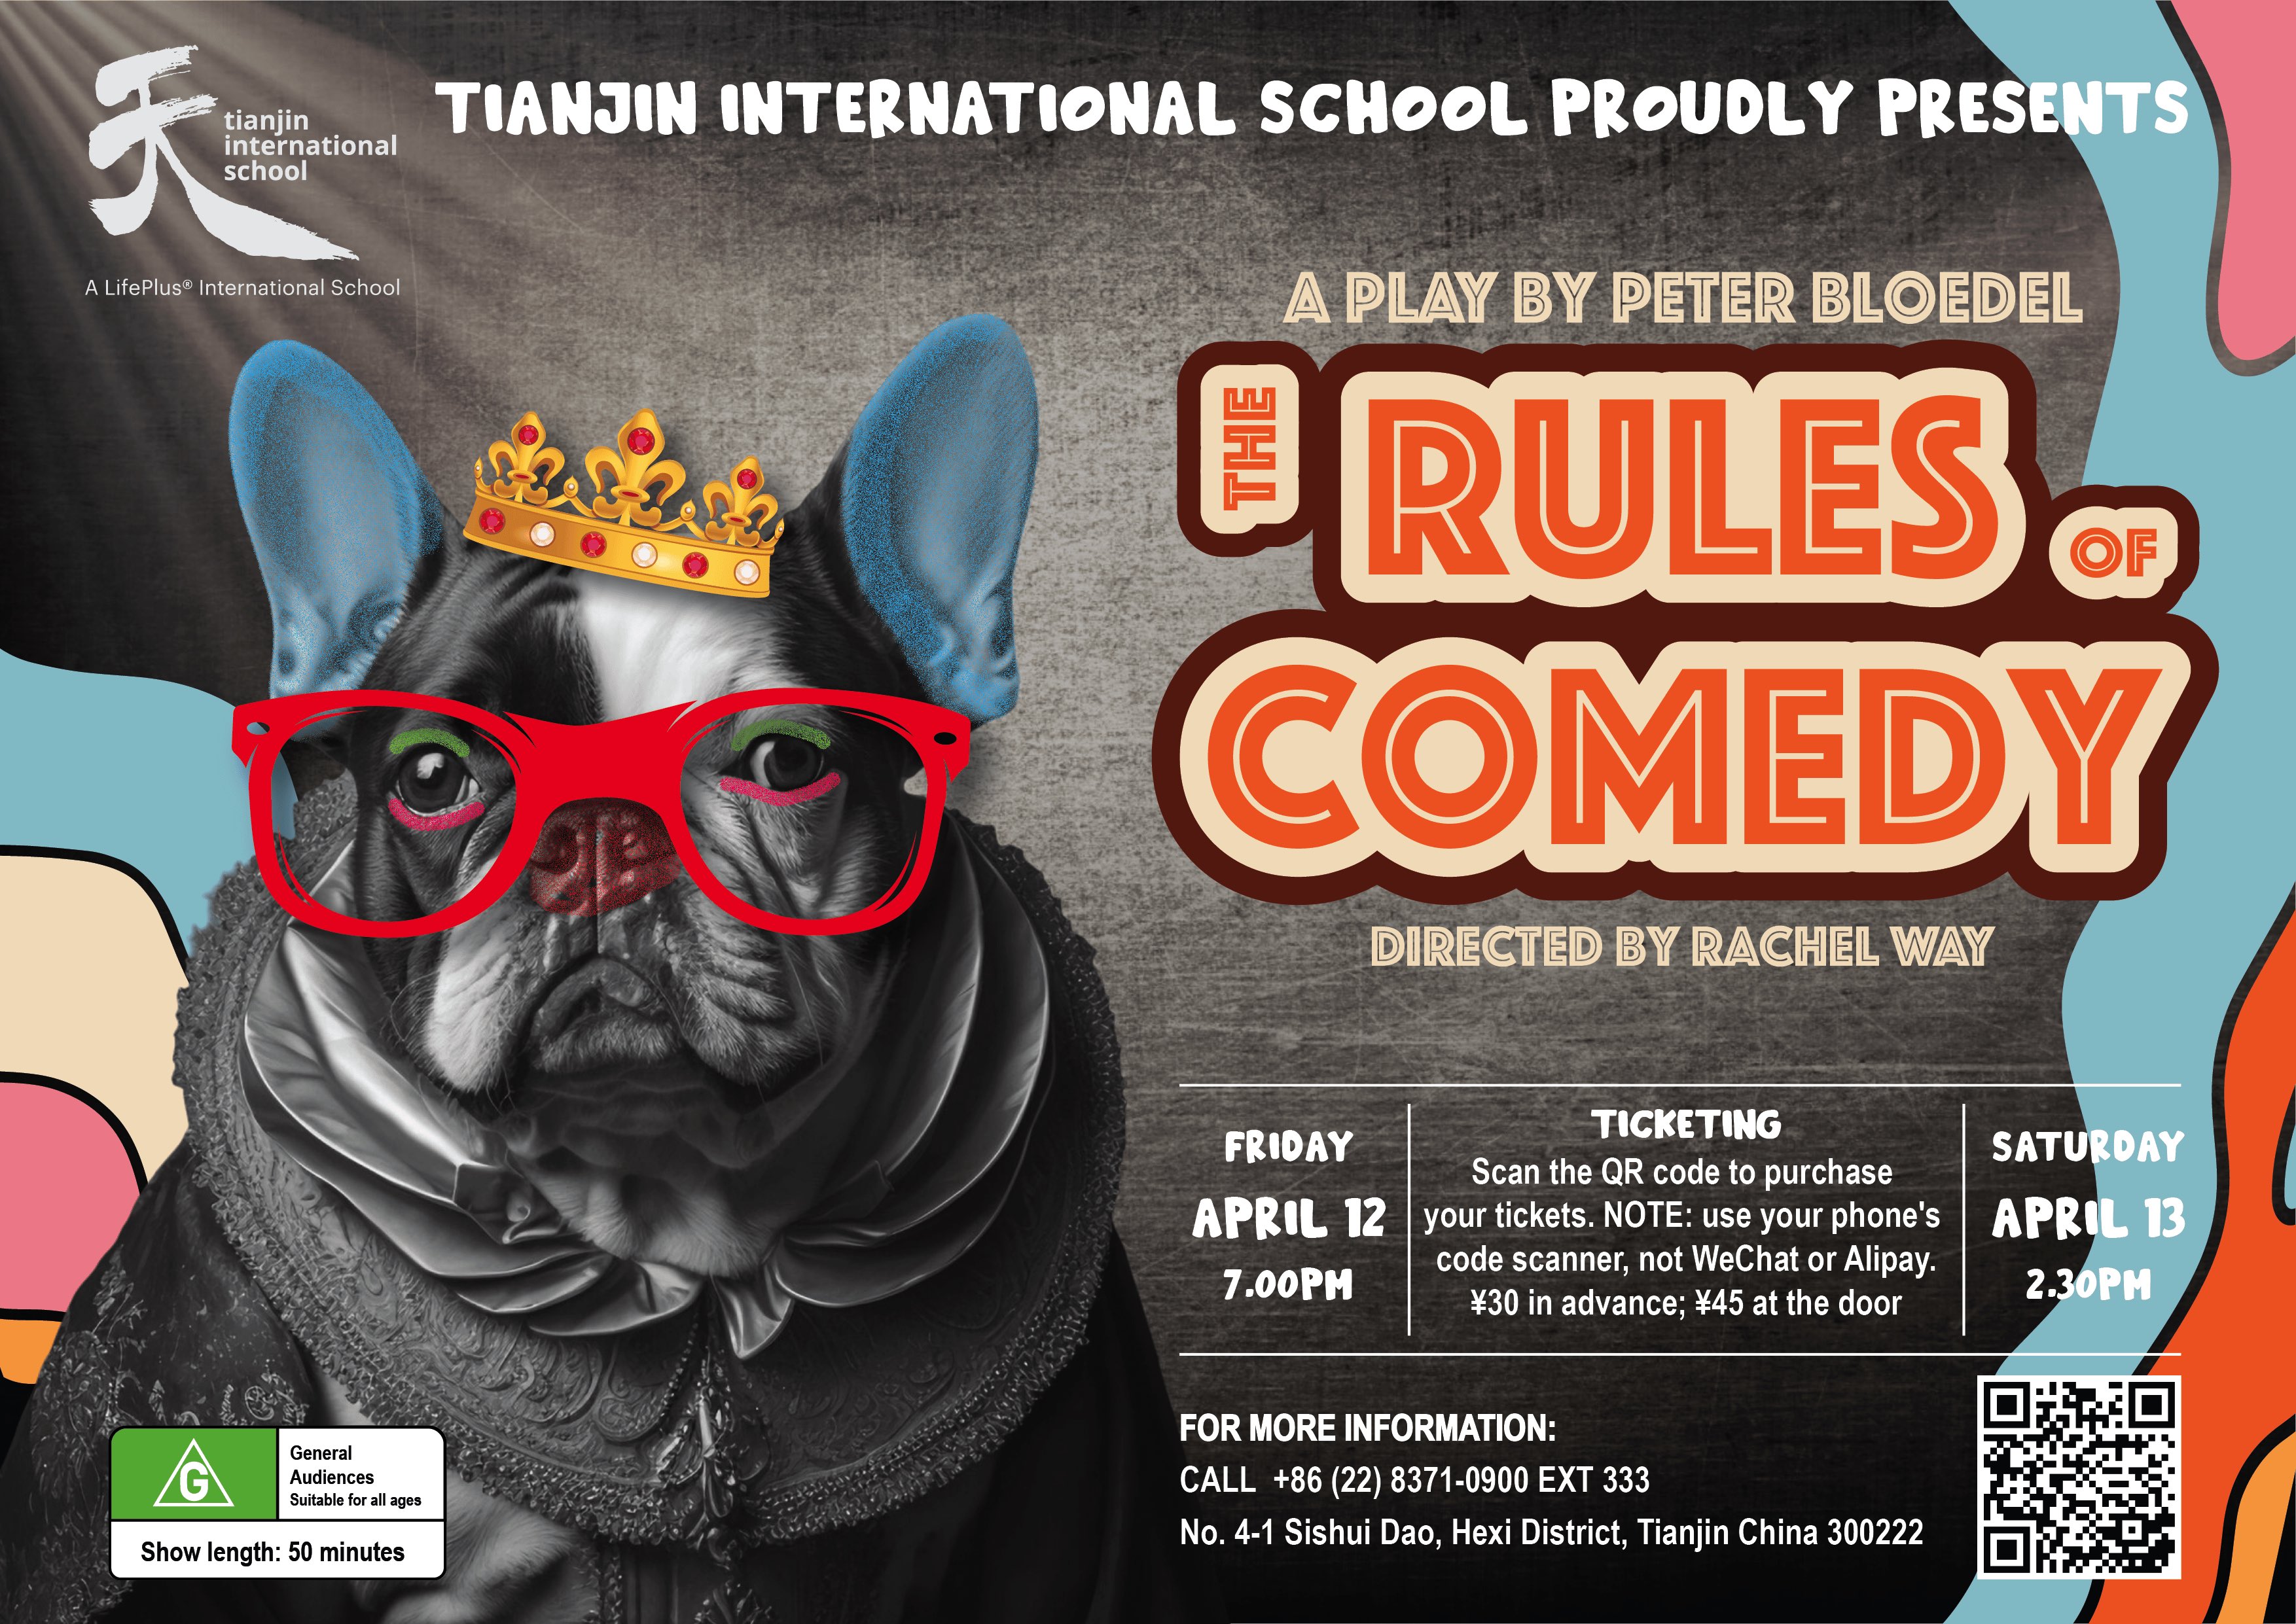 The Rules of Comedy - Friday, April 12, 7:00pm. 星期五 4月12日 晚上7点